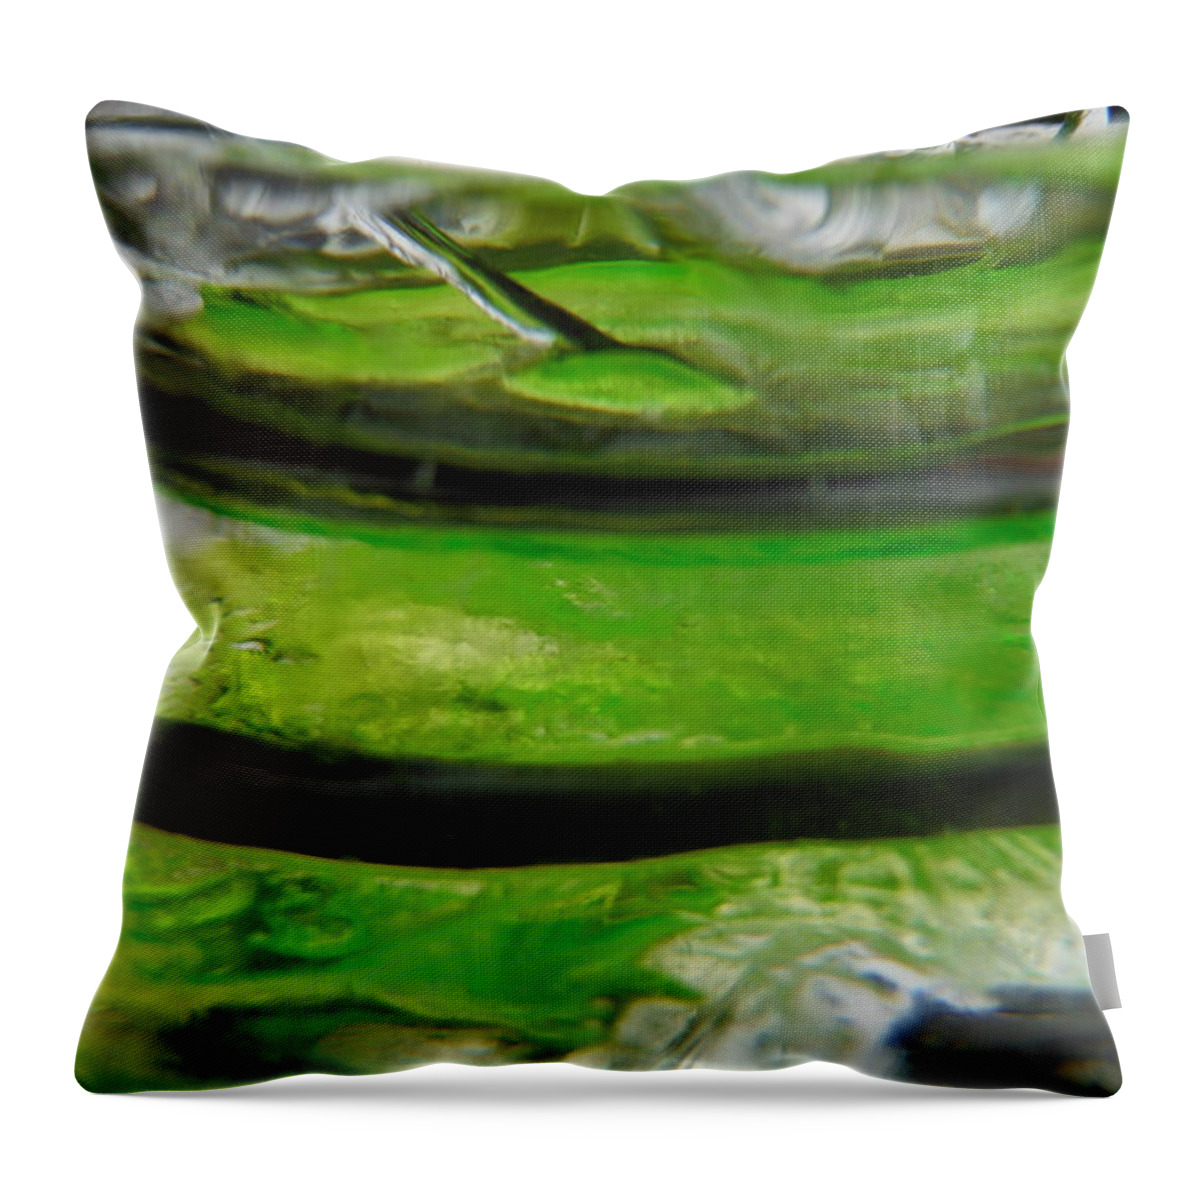 Color In Ice Series Throw Pillow featuring the photograph Color In Ice Series 25 by Paddy Shaffer